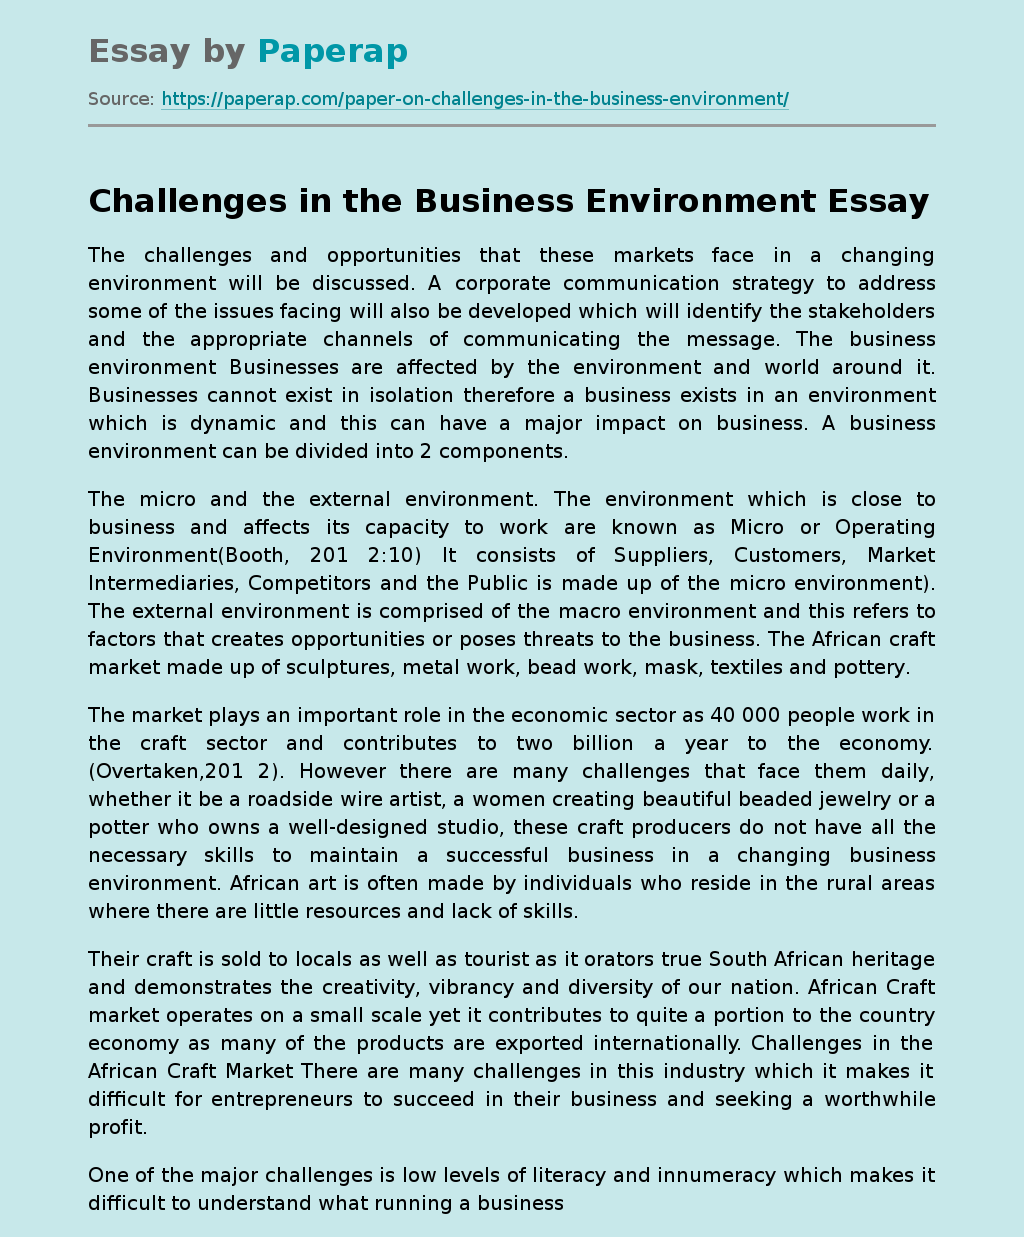 Challenges in the Business Environment